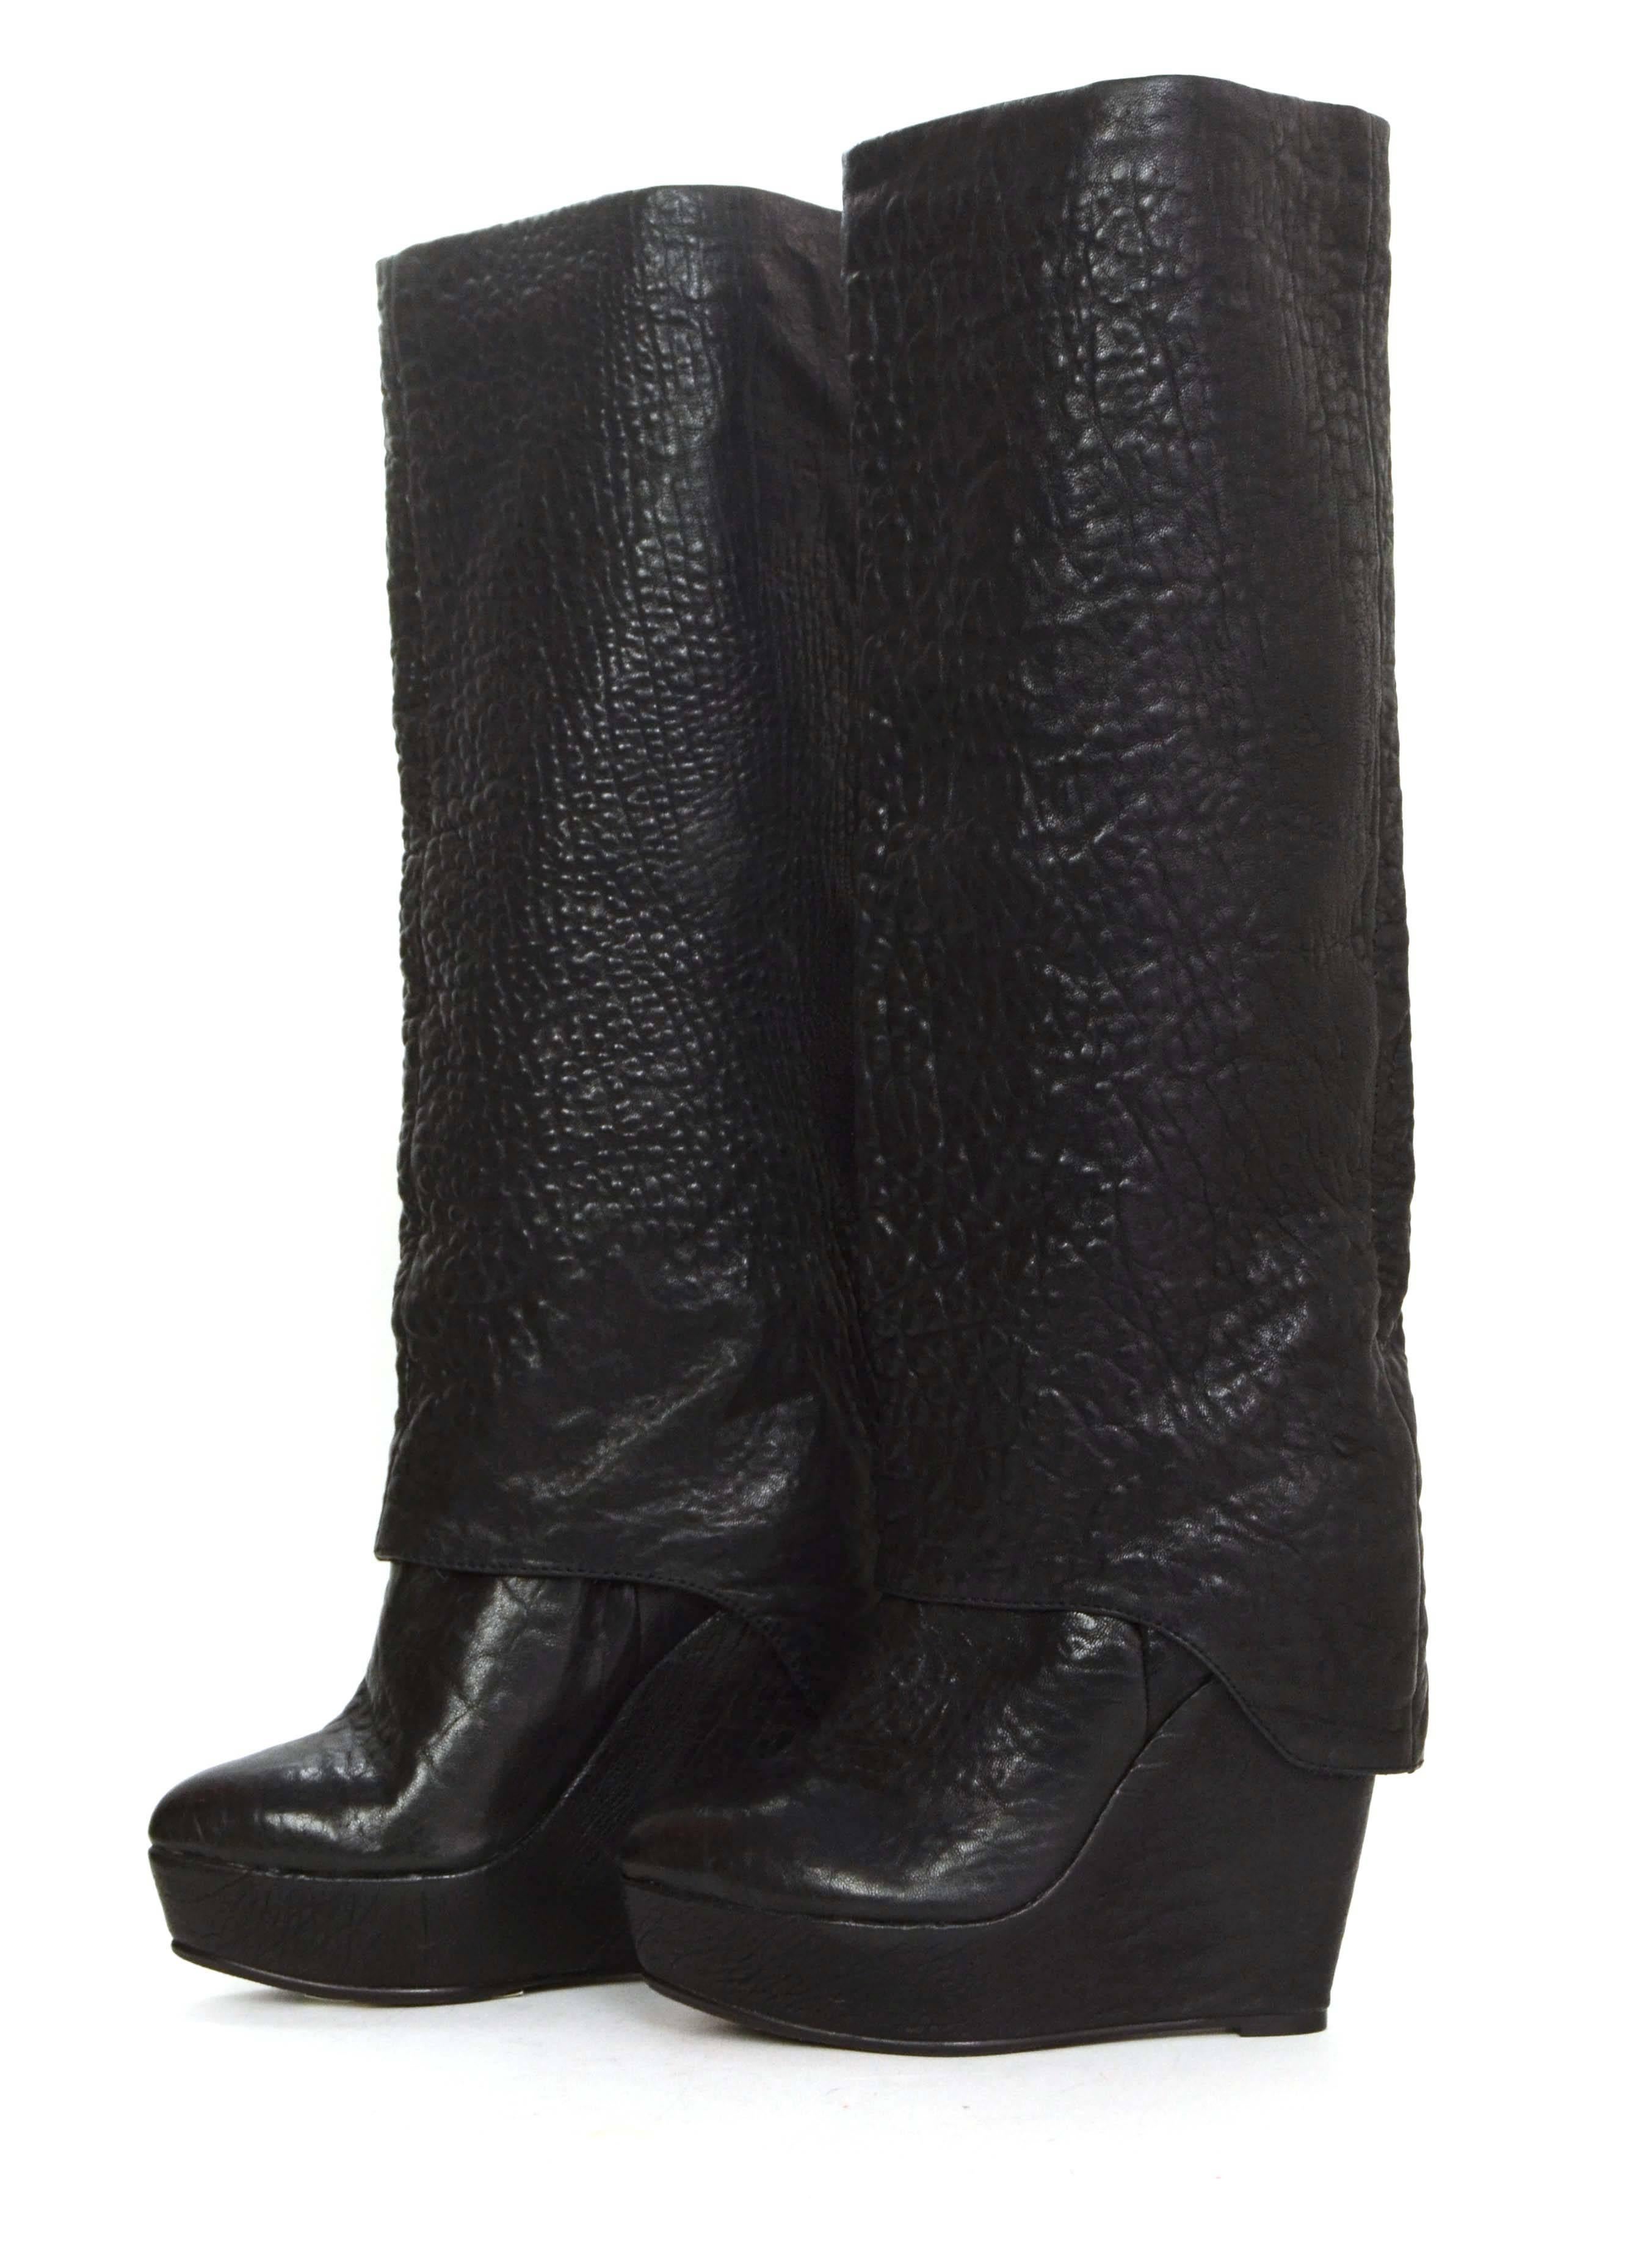 Elizabeth and James Black Pebbled Leather Platform Wedge Boots
Made In: China
Color: Black
Materials: Leather
Closure/Opening: Pull on
Sole Stamp: Elizabeth and James Vero Cuoio 6 ½ B
Overall Condition: Excellent pre-owned condition with the